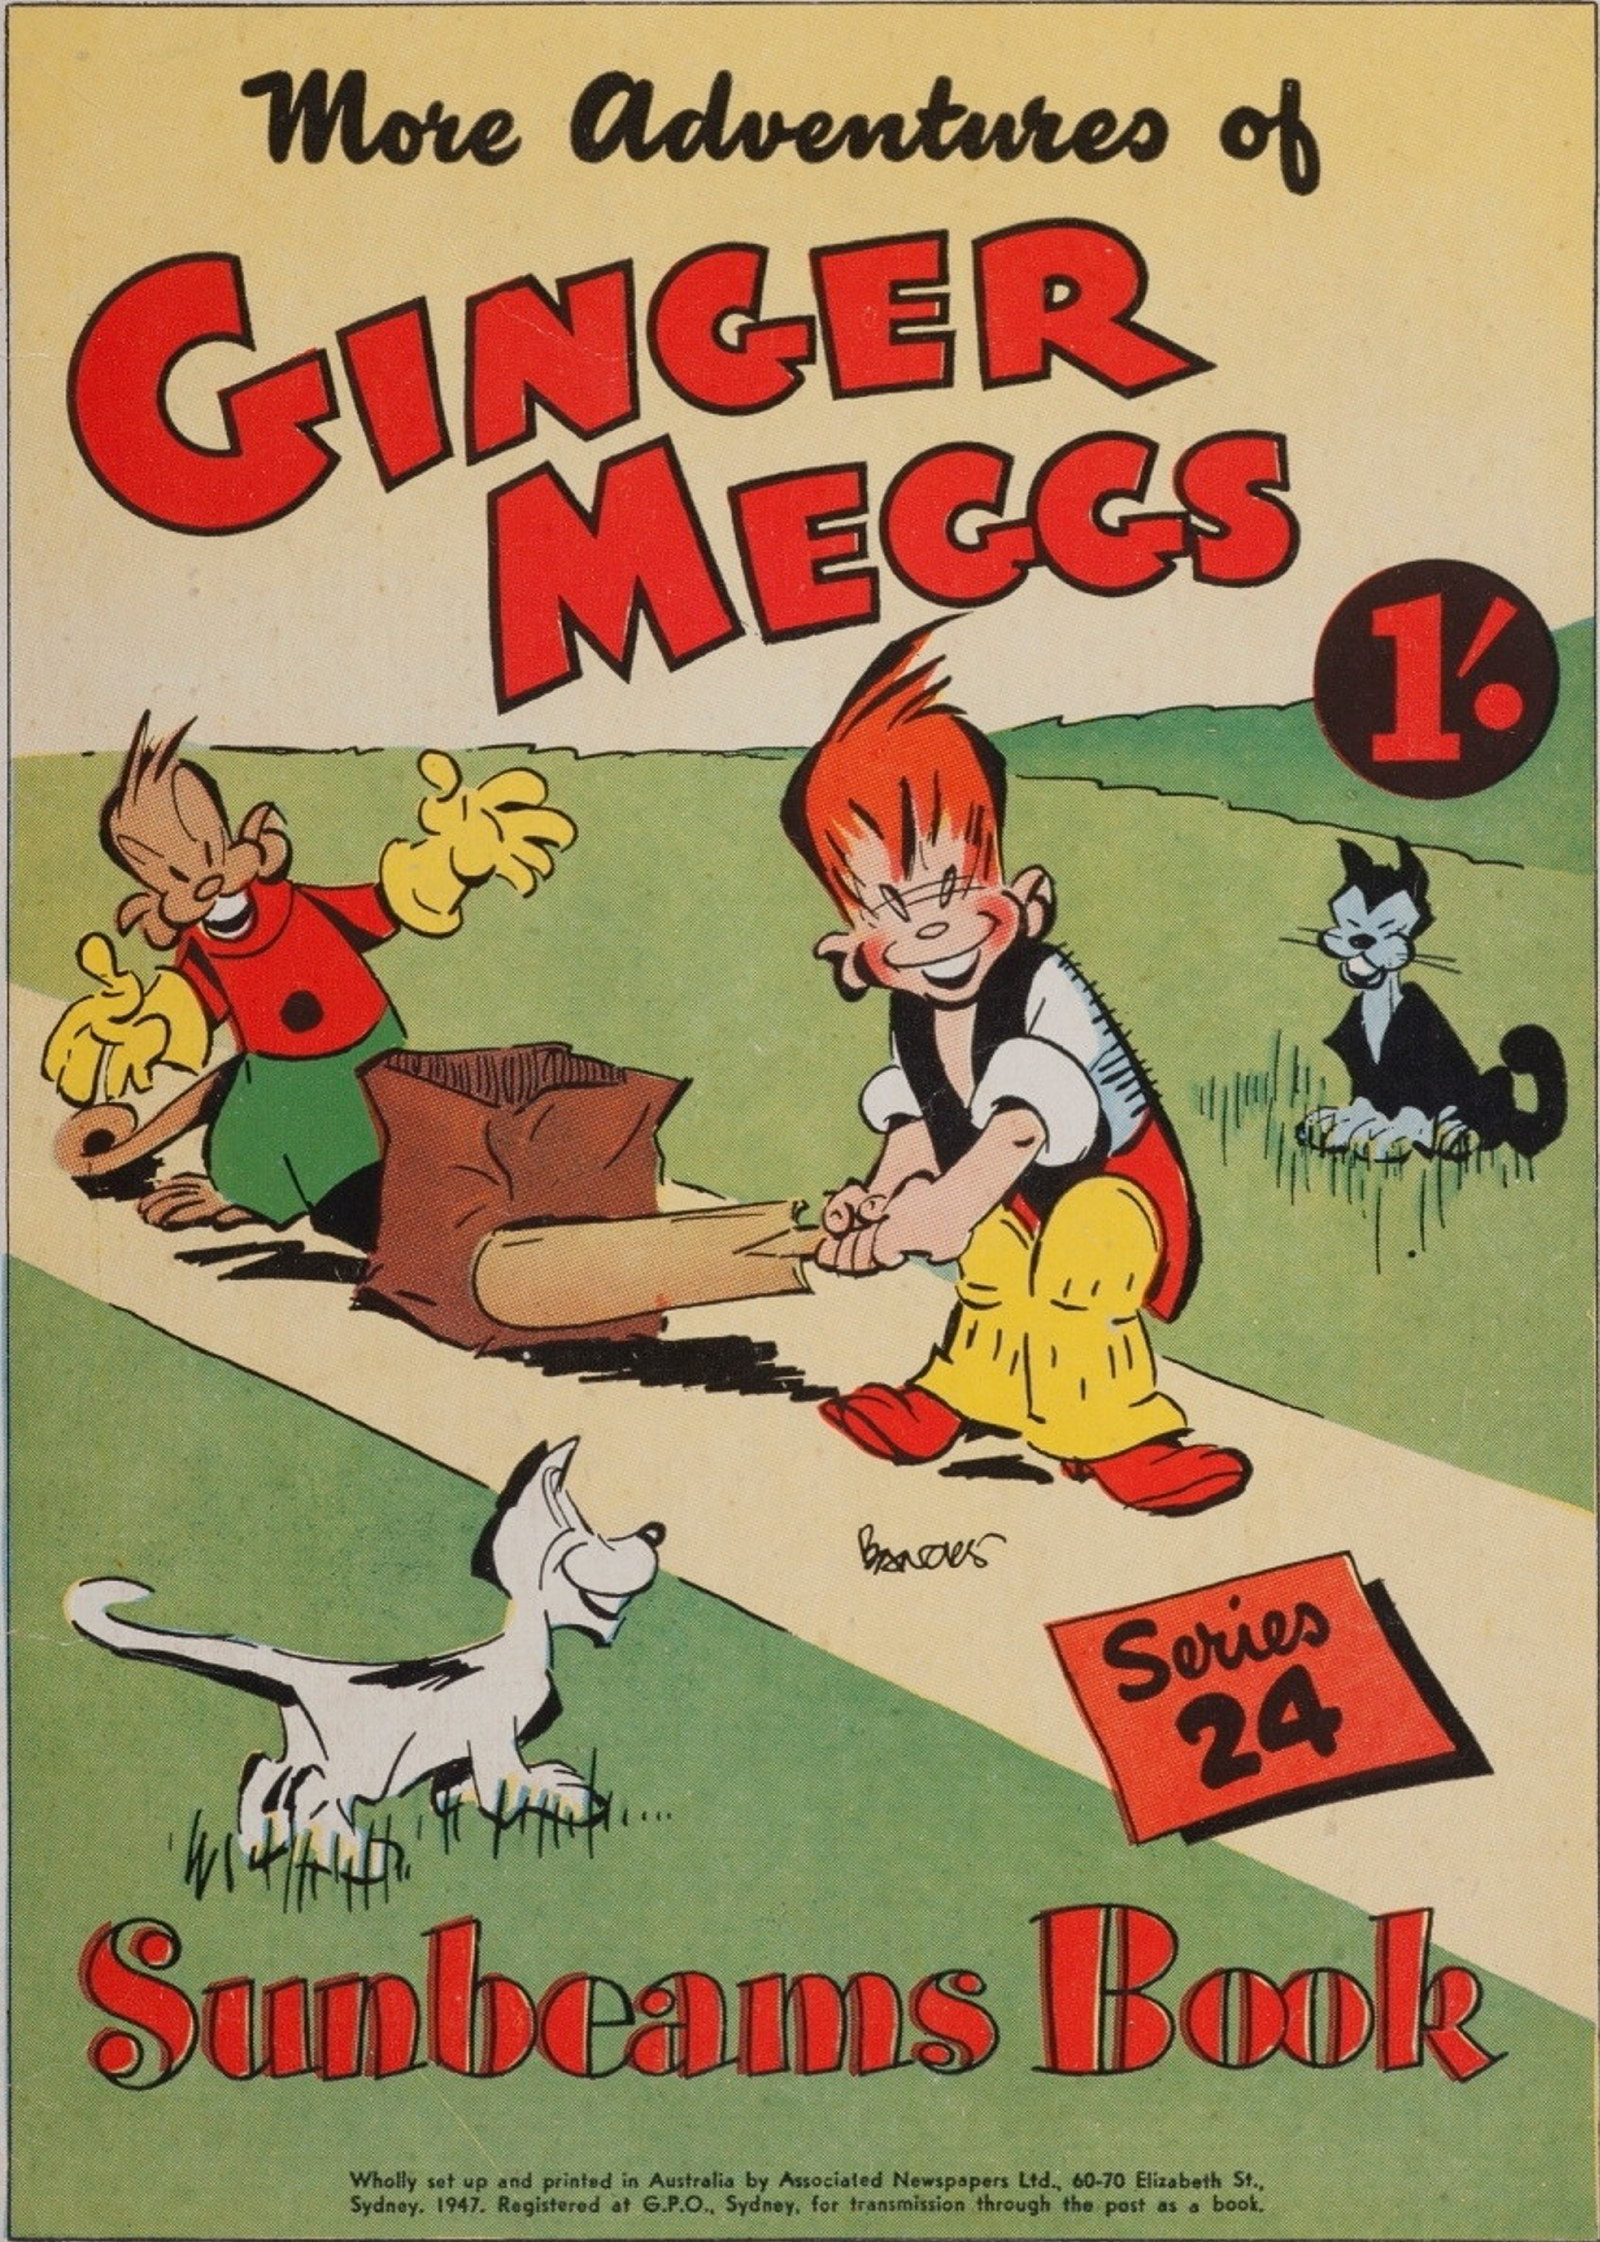 Sunbeams Book Series 24: More Adventures of Ginger Meggs. Cover, 1947.